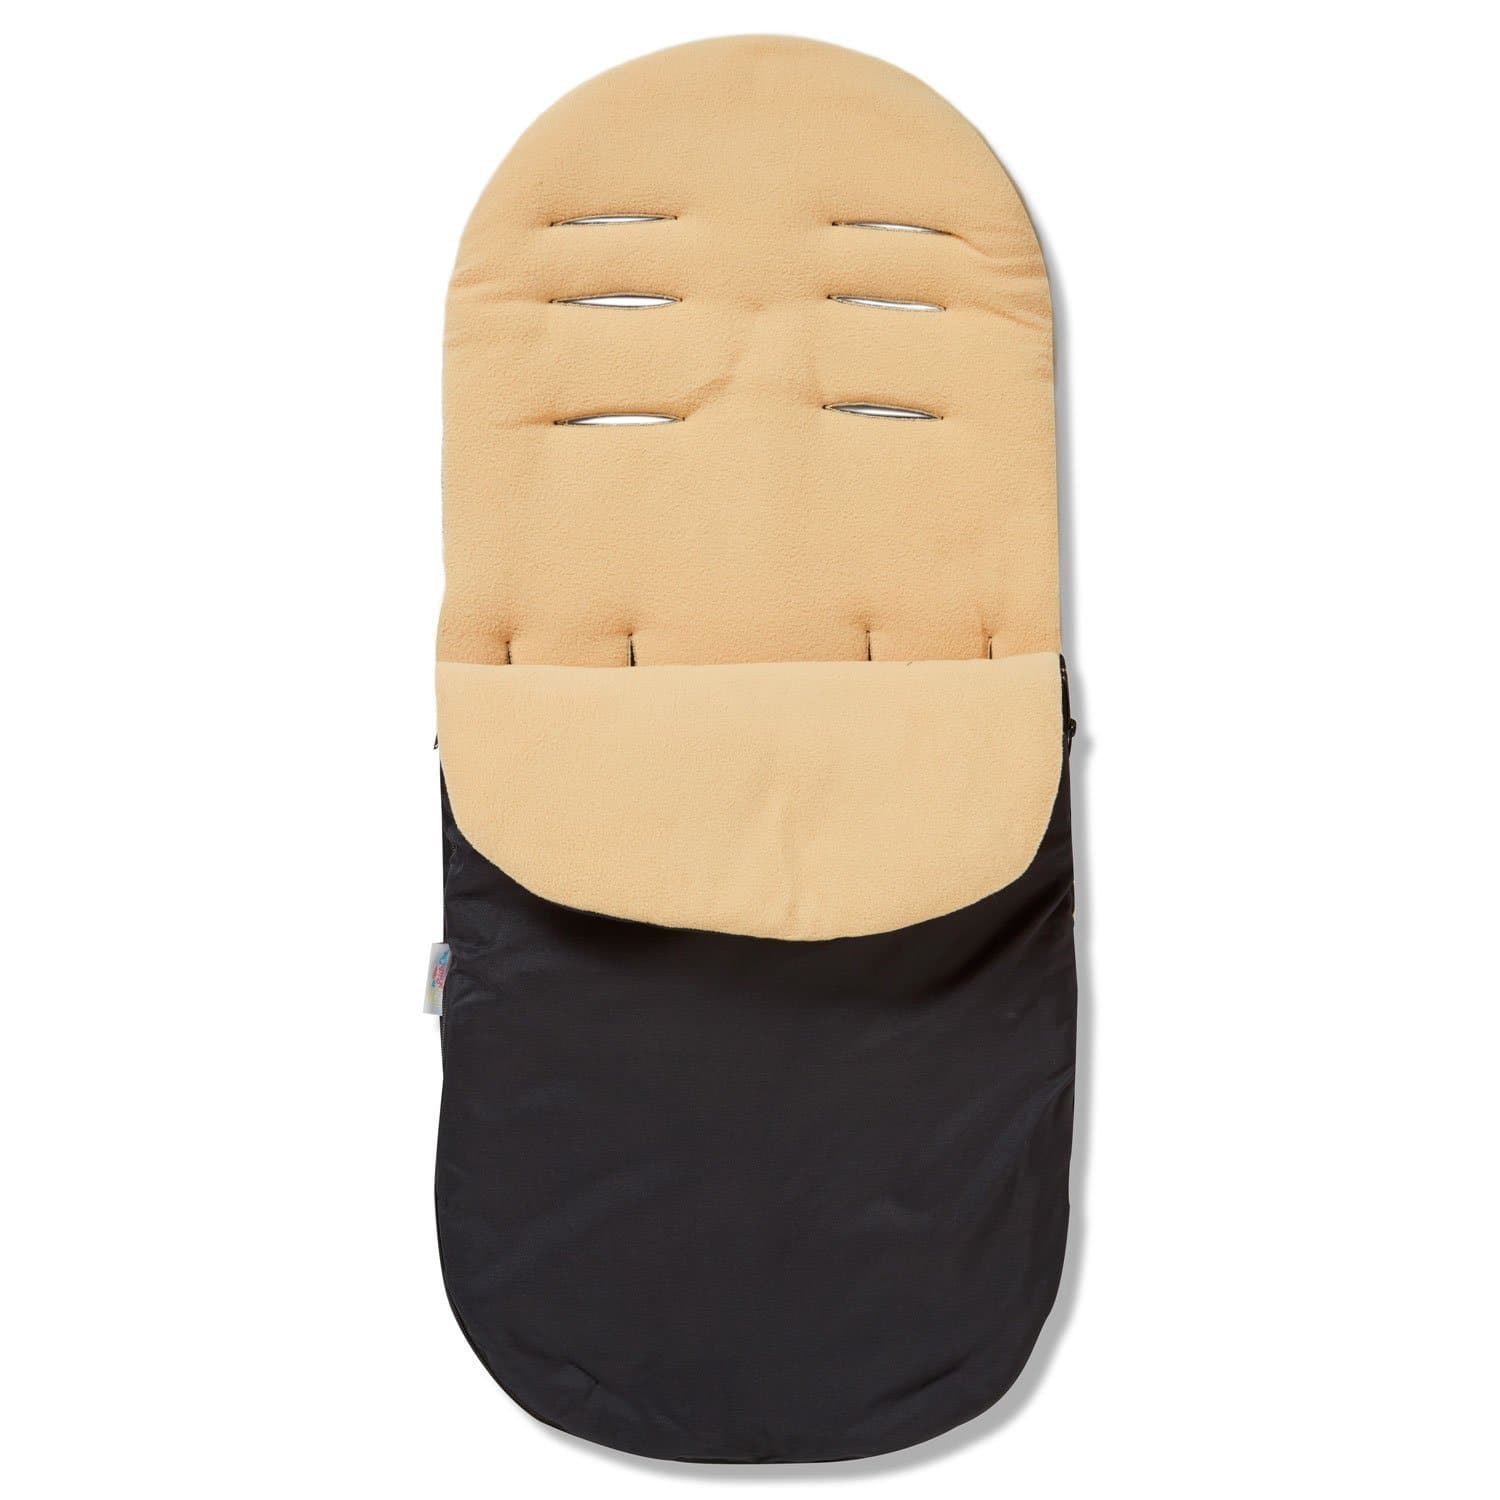 Footmuff / Cosy Toes Compatible with Greentom - Sand / Fits All Models | For Your Little One